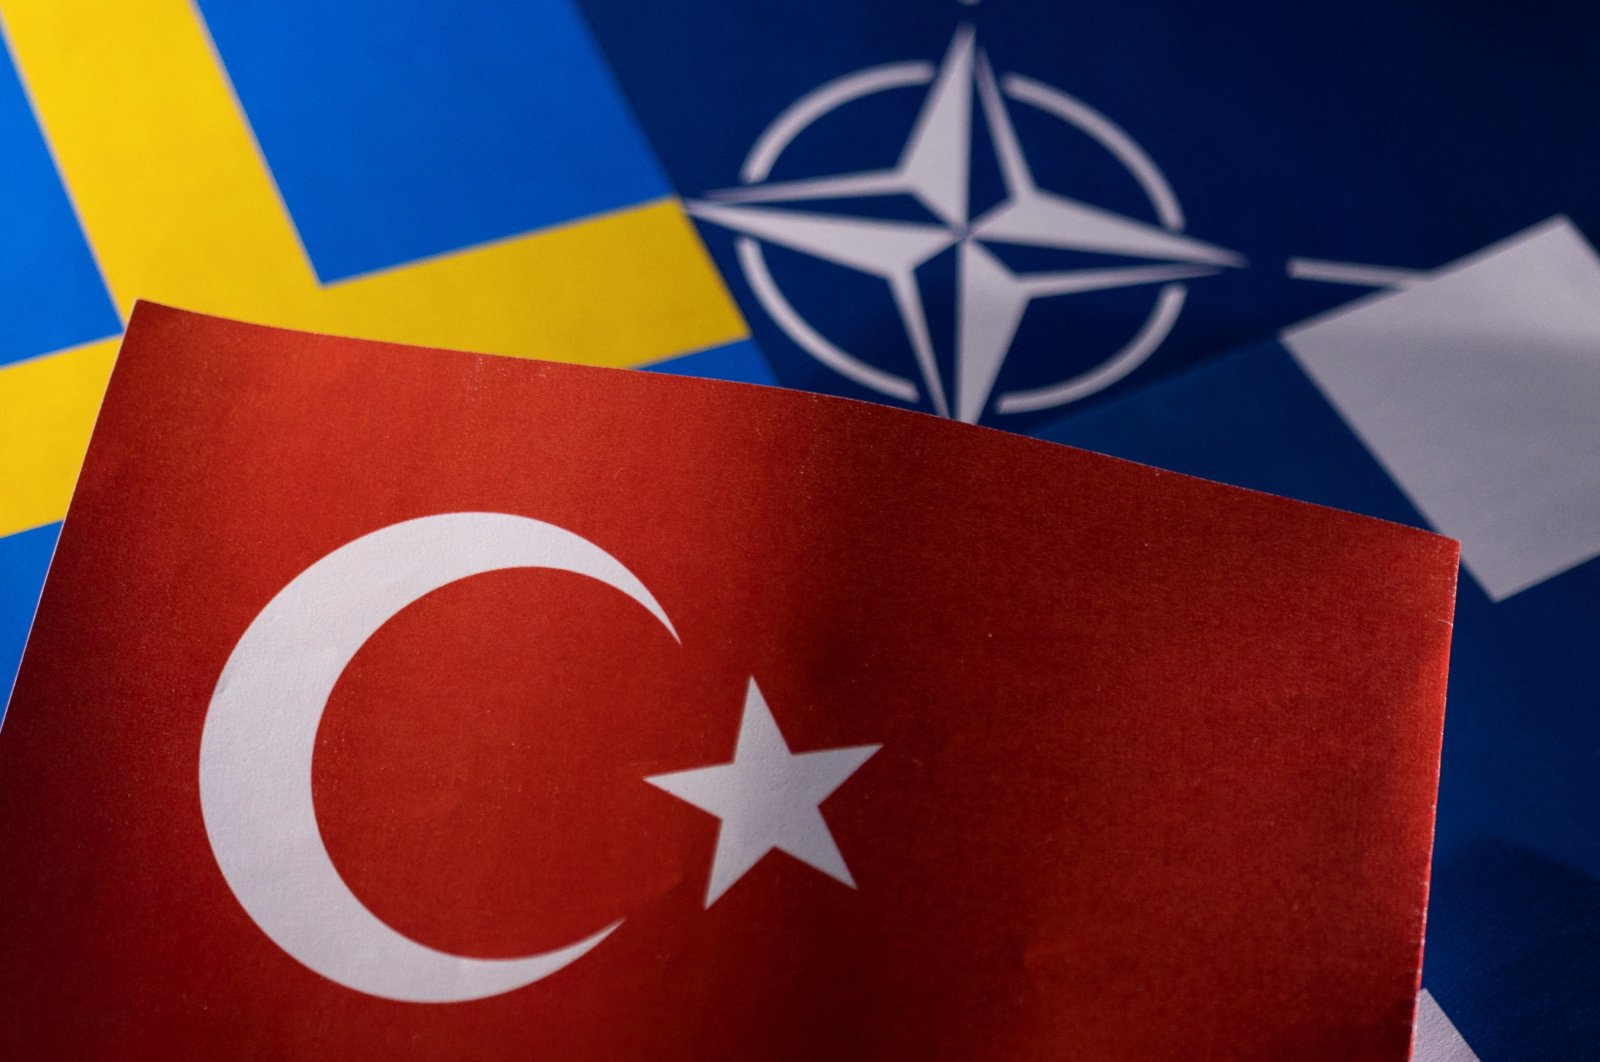 The Turkish, Swedish, NATO and Finnish flags are seen in this illustration taken May 18, 2022. (Reuters Illustration)